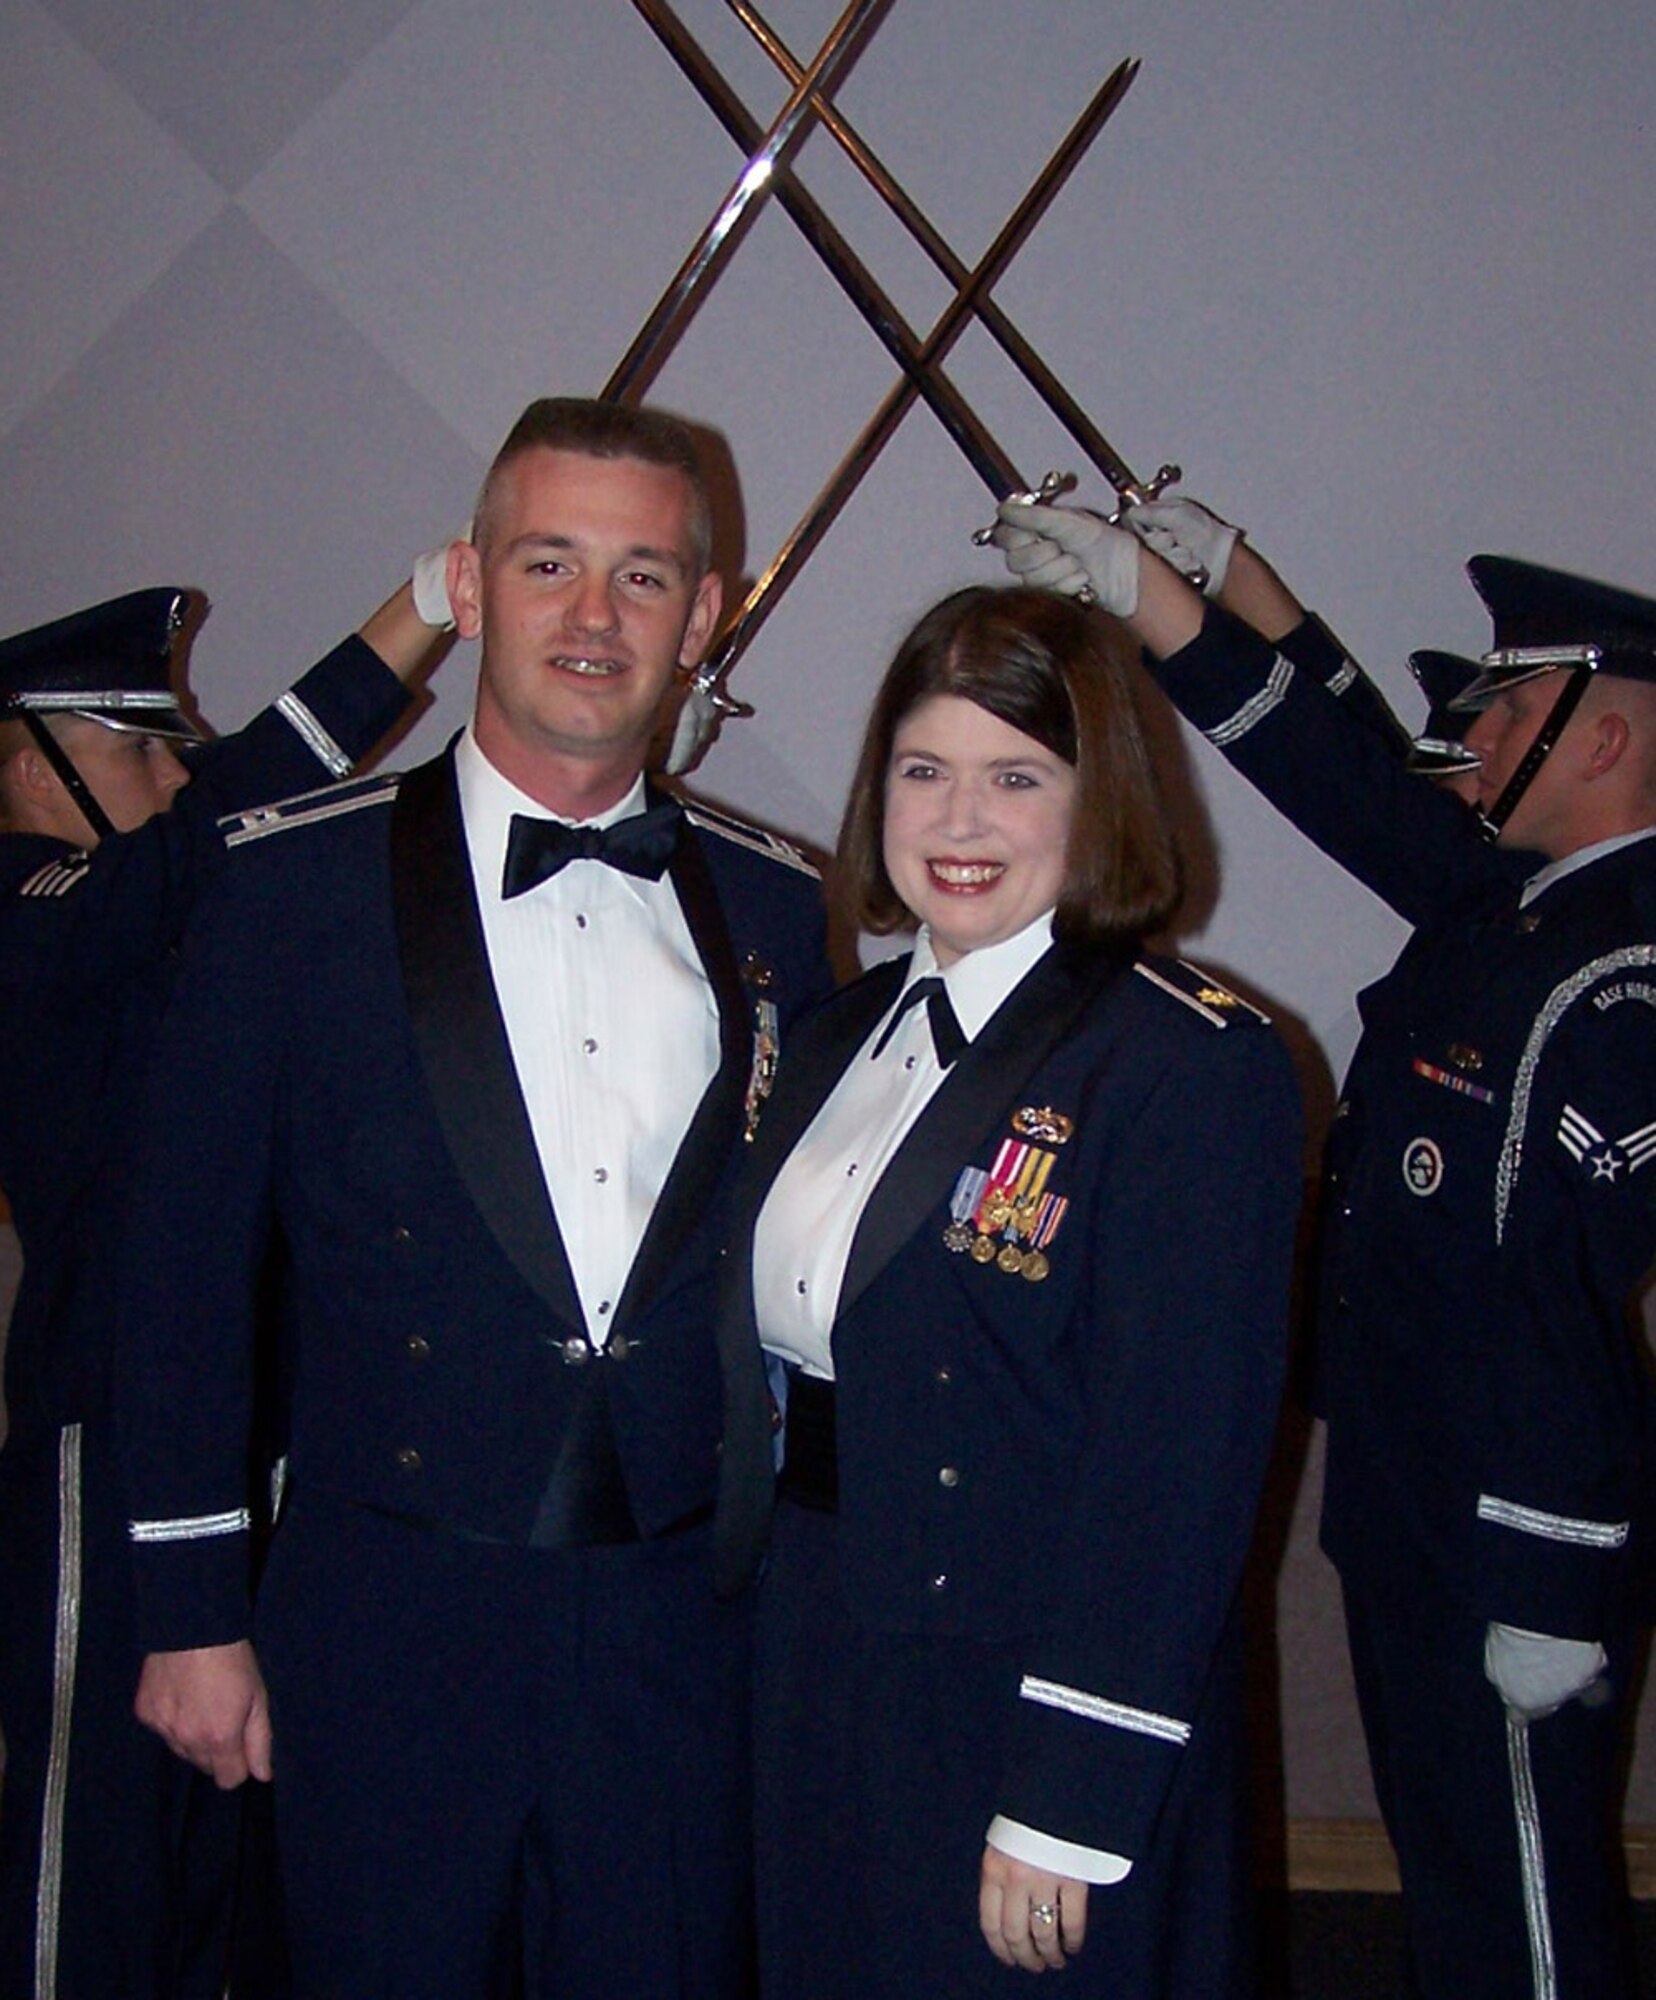 Capt. Christopher and wife Maj. Kimberly Tooman, both assigned to the 35th Fighter Wing Misawa Air Base, Japan take a moment to pose for a picture after the graduation ceremony following the Advanced Maintenance and Munitions Officer School. The AMMOS, located at Nellis Air Force Base, Nev., is a 14 week course offered to maintenance officers.